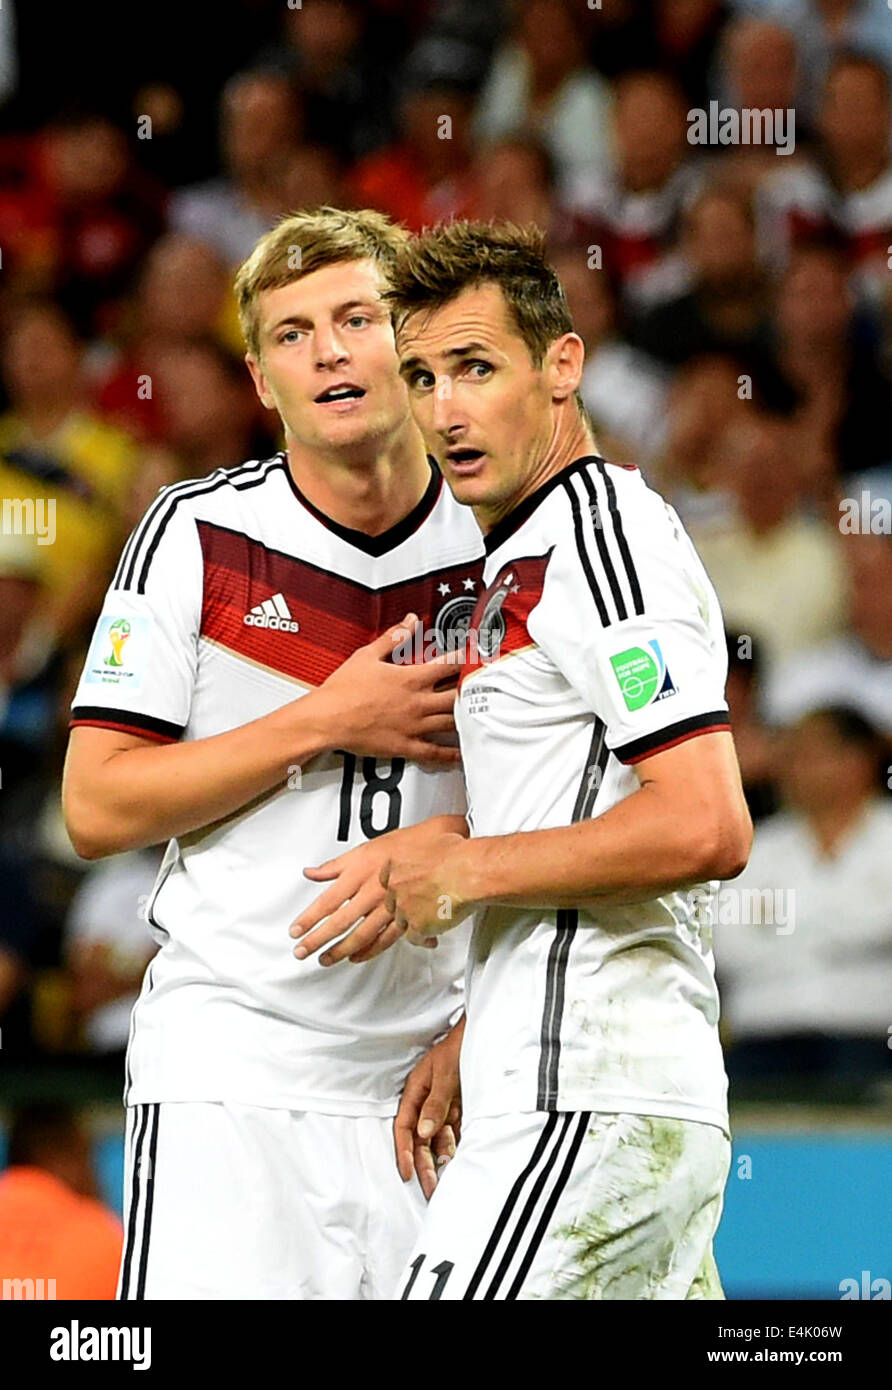 Rio De Janeiro, Brazil. 13th July, 2014. Germany's Miroslav Klose (R) and Toni Kroos react during the final match between Germany and Argentina of 2014 FIFA World Cup at the Estadio do Maracana Stadium in Rio de Janeiro, Brazil, on July 13, 2014. Credit:  Liu Dawei/Xinhua/Alamy Live News Stock Photo